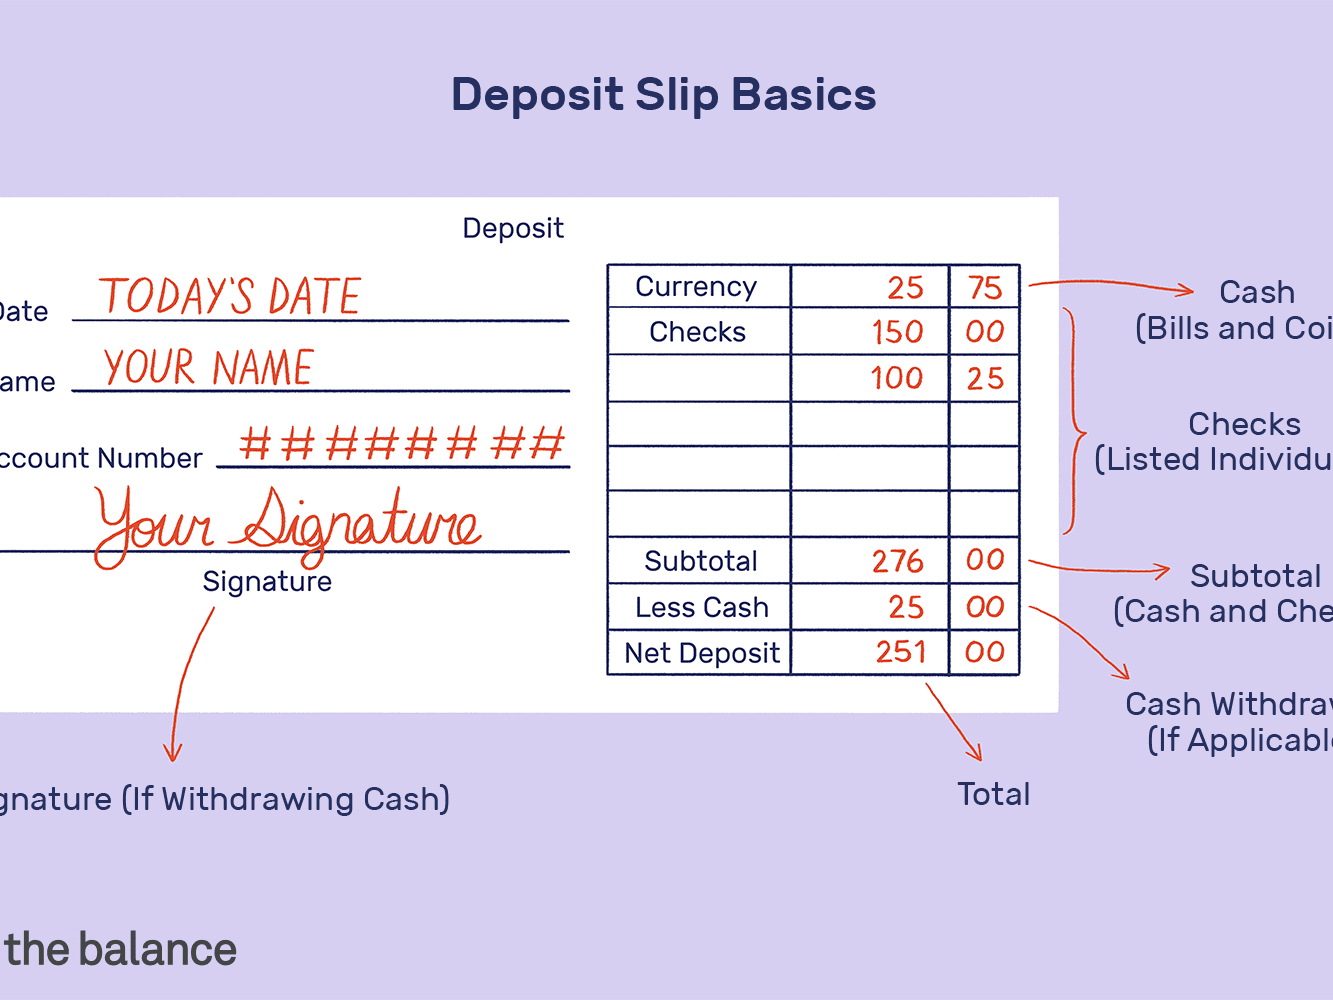 How to Fill Out a Deposit Slip With Deposit Slip Form Template Throughout Deposit Slip Form Template